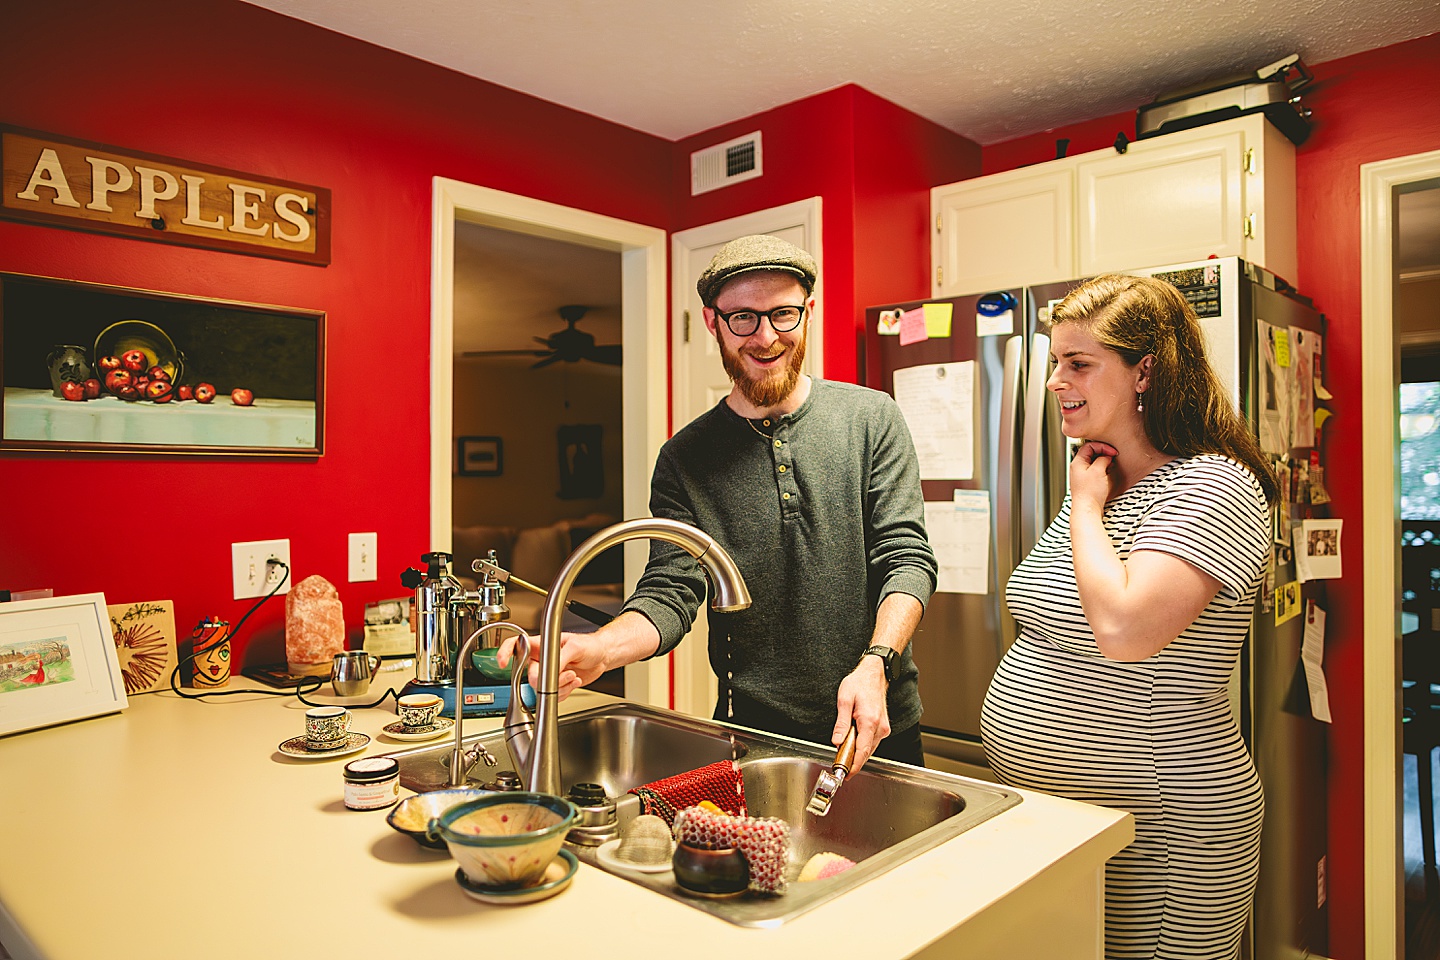 Couple making coffee in a red kitchen